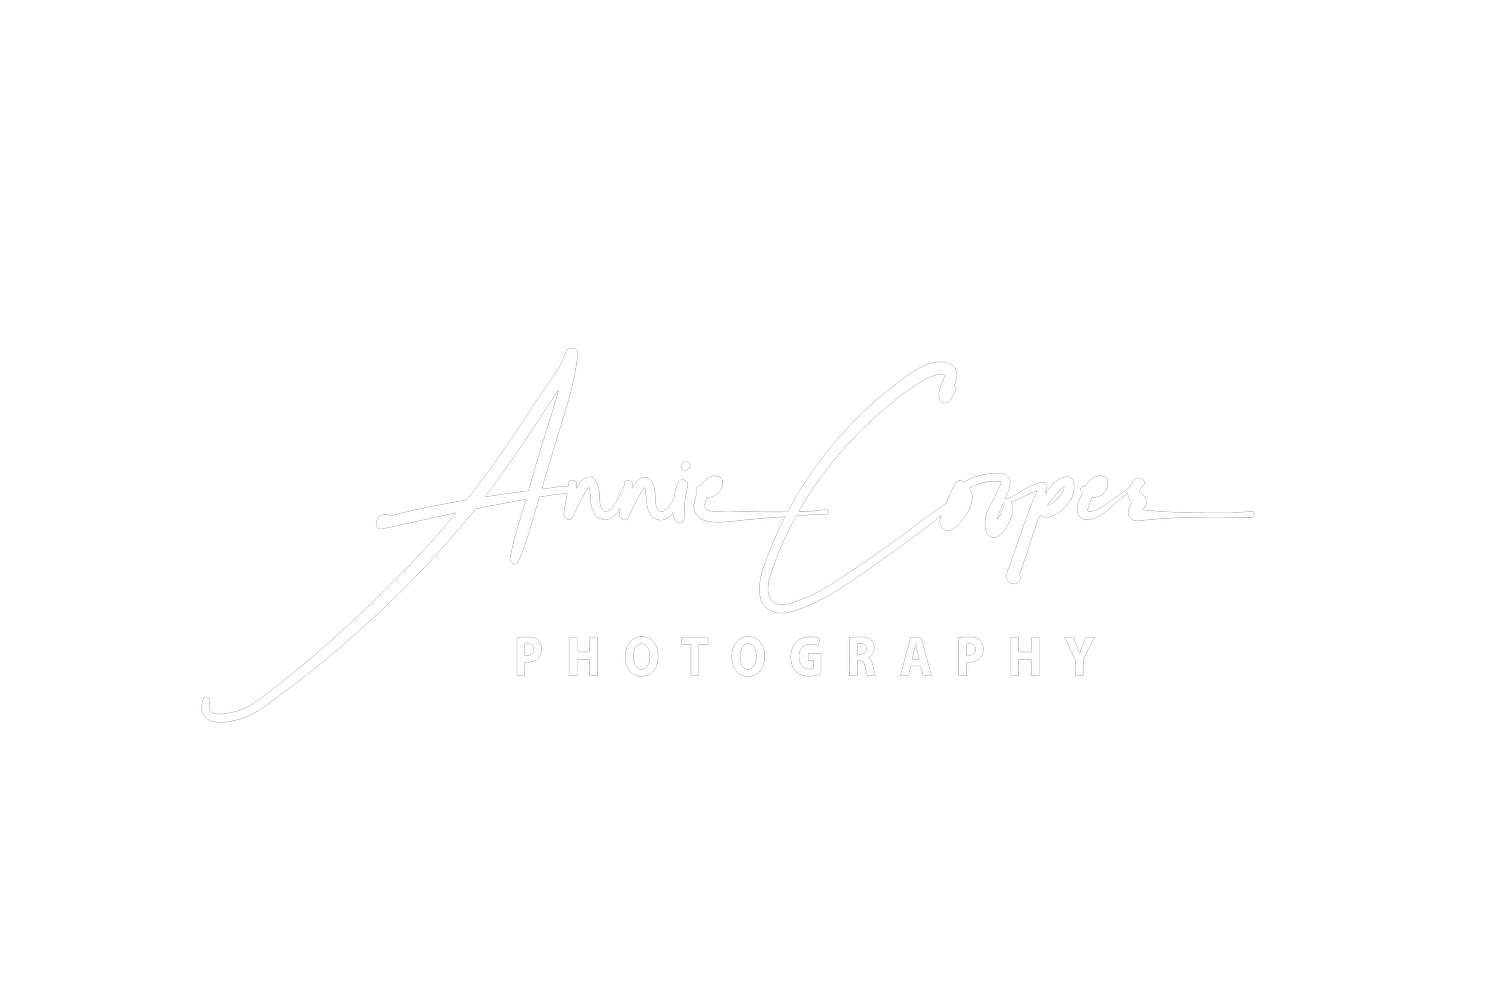 Annie Cooper Photography